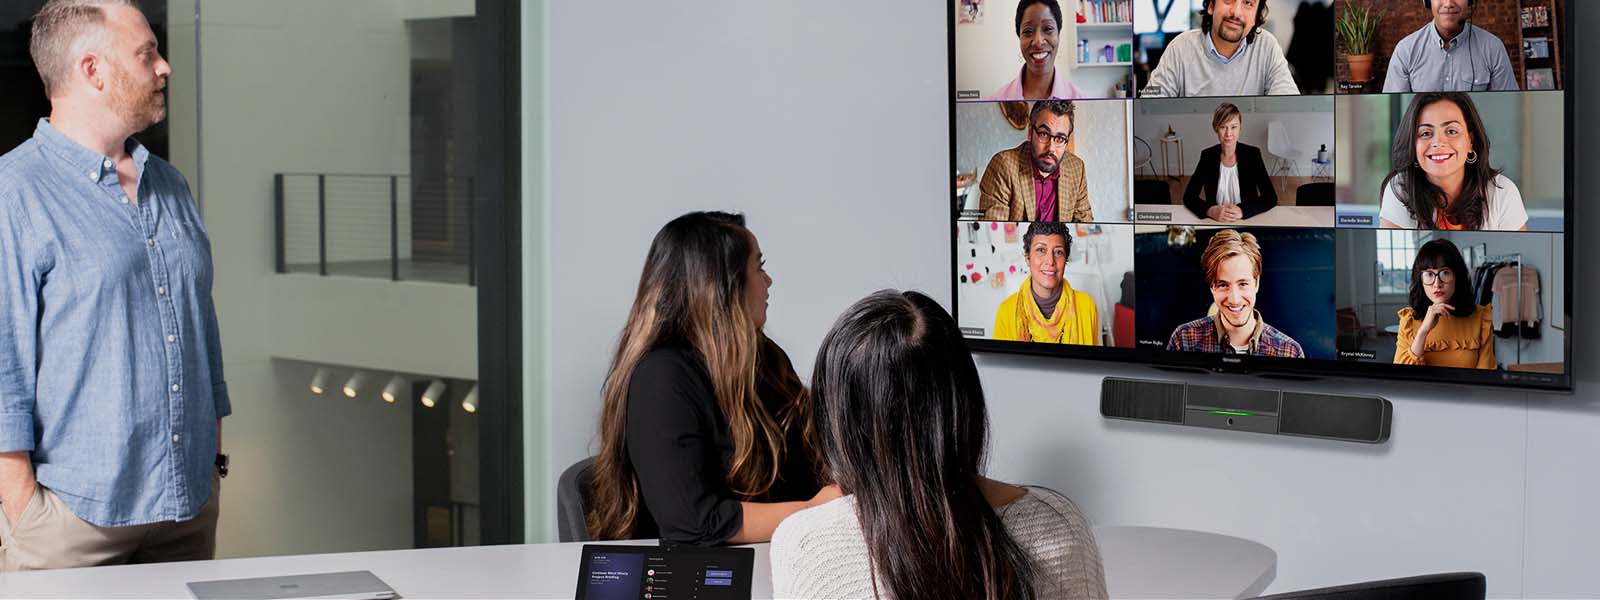 Three people in a conference room participating in a videoconference